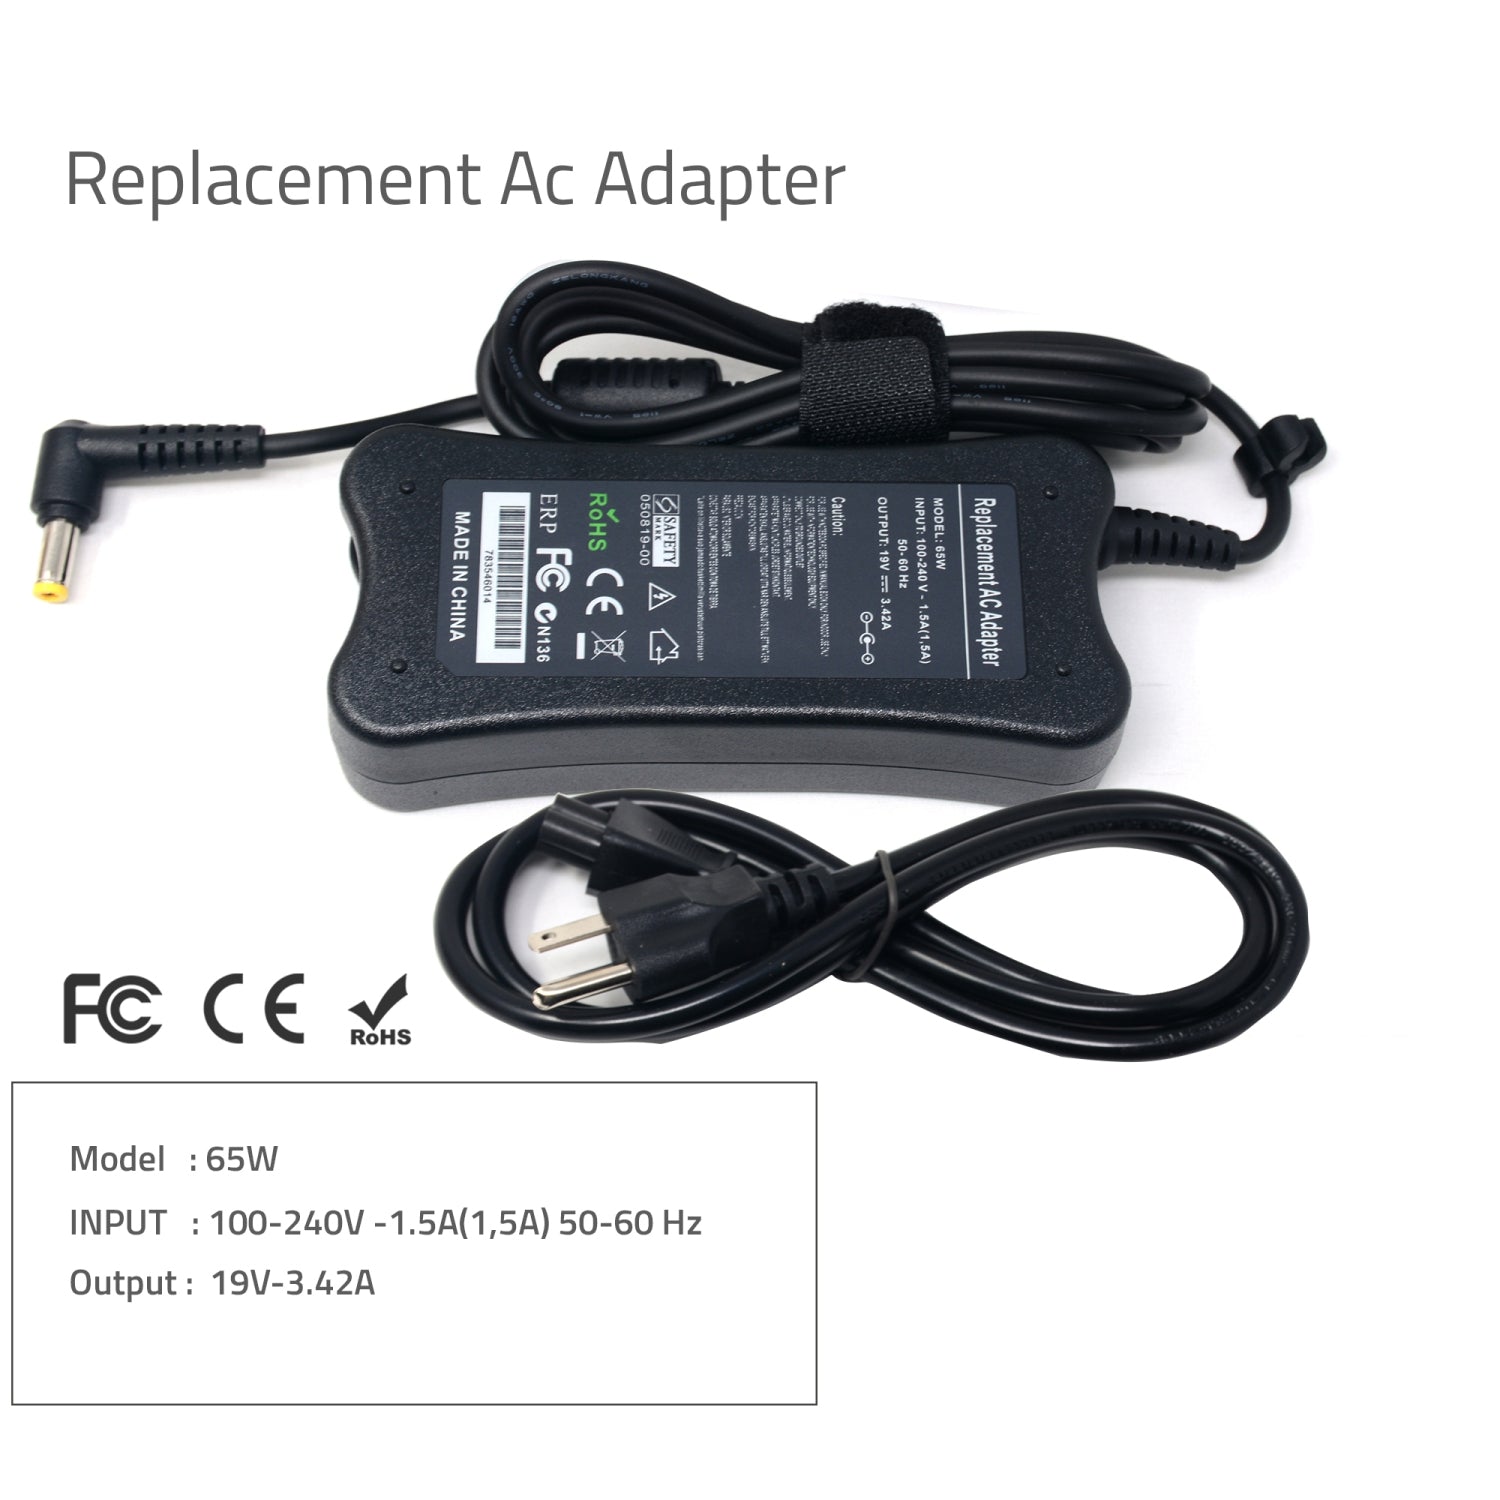 NEW Replacement 65W AC adapter charger for LENOVO 19V 3.42A Laptop Power Adapter Compatible with Lenovo IdeaPad 330 330S 320 320S ADL45WCC, Yoga 710 510 520 530